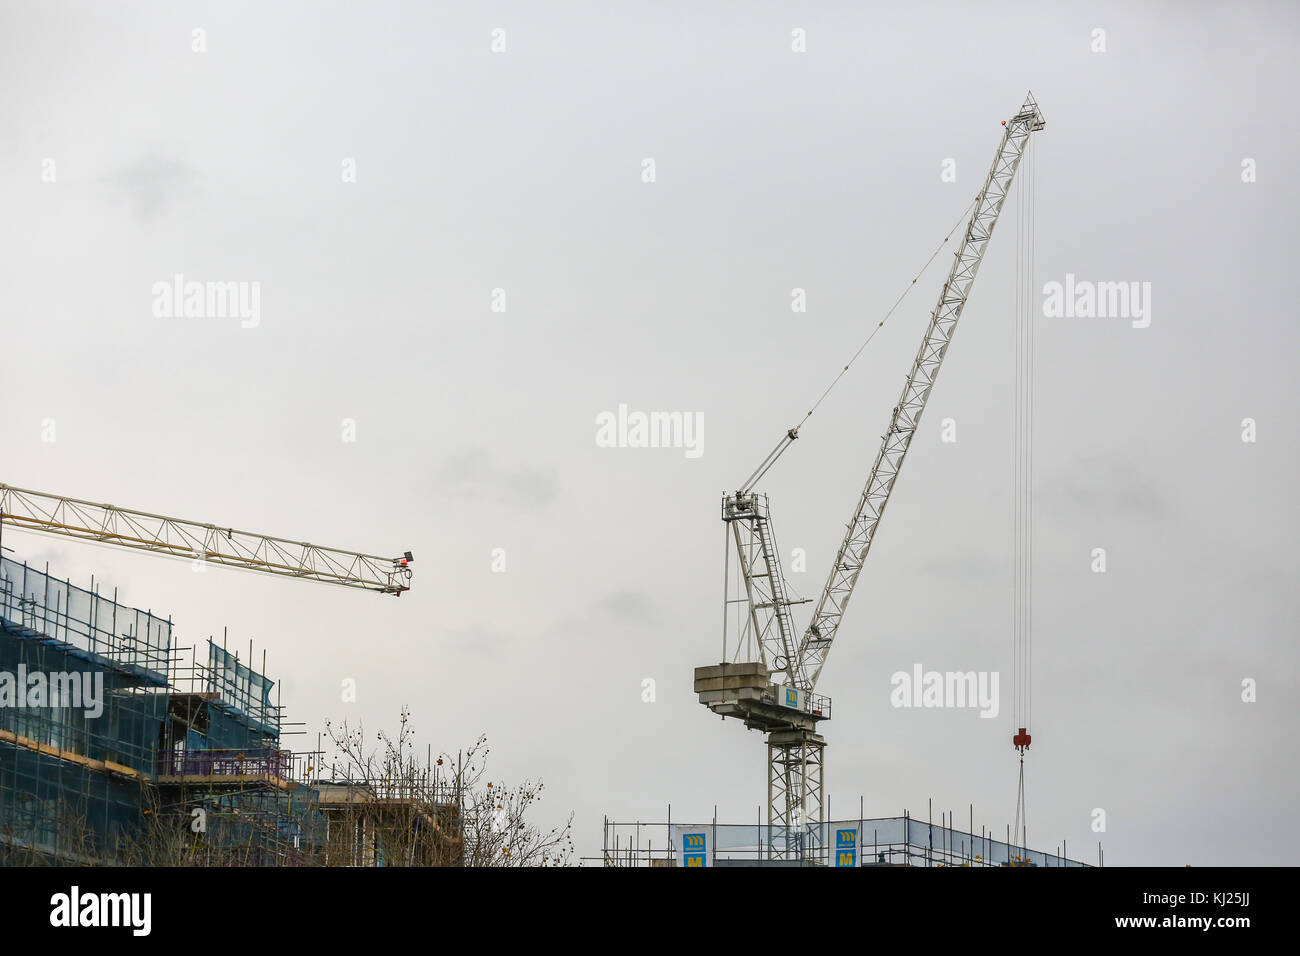 North London. UK 21 Nov 2017 - Building cranes on a new housing estate in North London properties as Britain's Chancellor of the Exchequer Philip Hammond is expected to announce plans to build 300,000 homes every year, in his autumn budget on Wednesday, 22 November 2017. It has been reported in the Sunday Times newspaper that Philip Hammond will do 'whatever it takes' to meet this target. Stock Photo